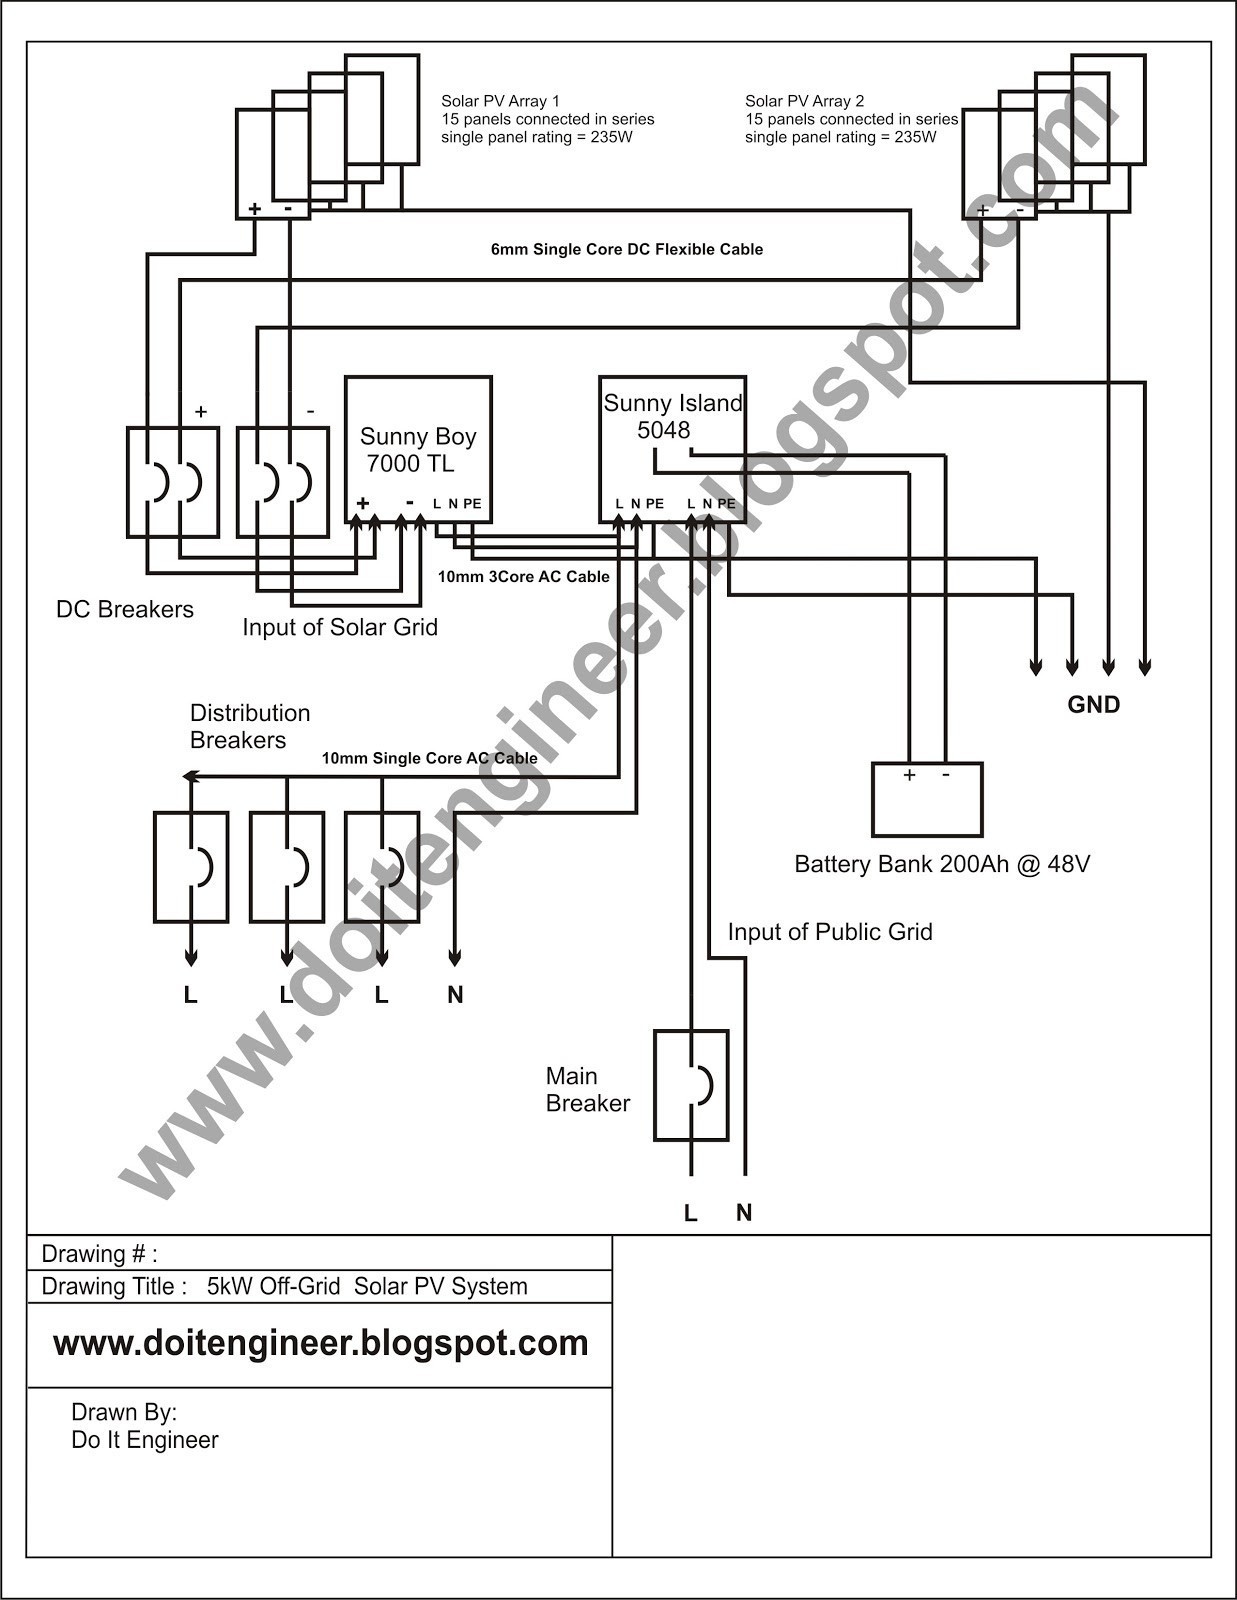 Solar Panel Wiring Diagram Example Inspirationa Wiring Diagram for F Grid solar System Refrence 5kw F